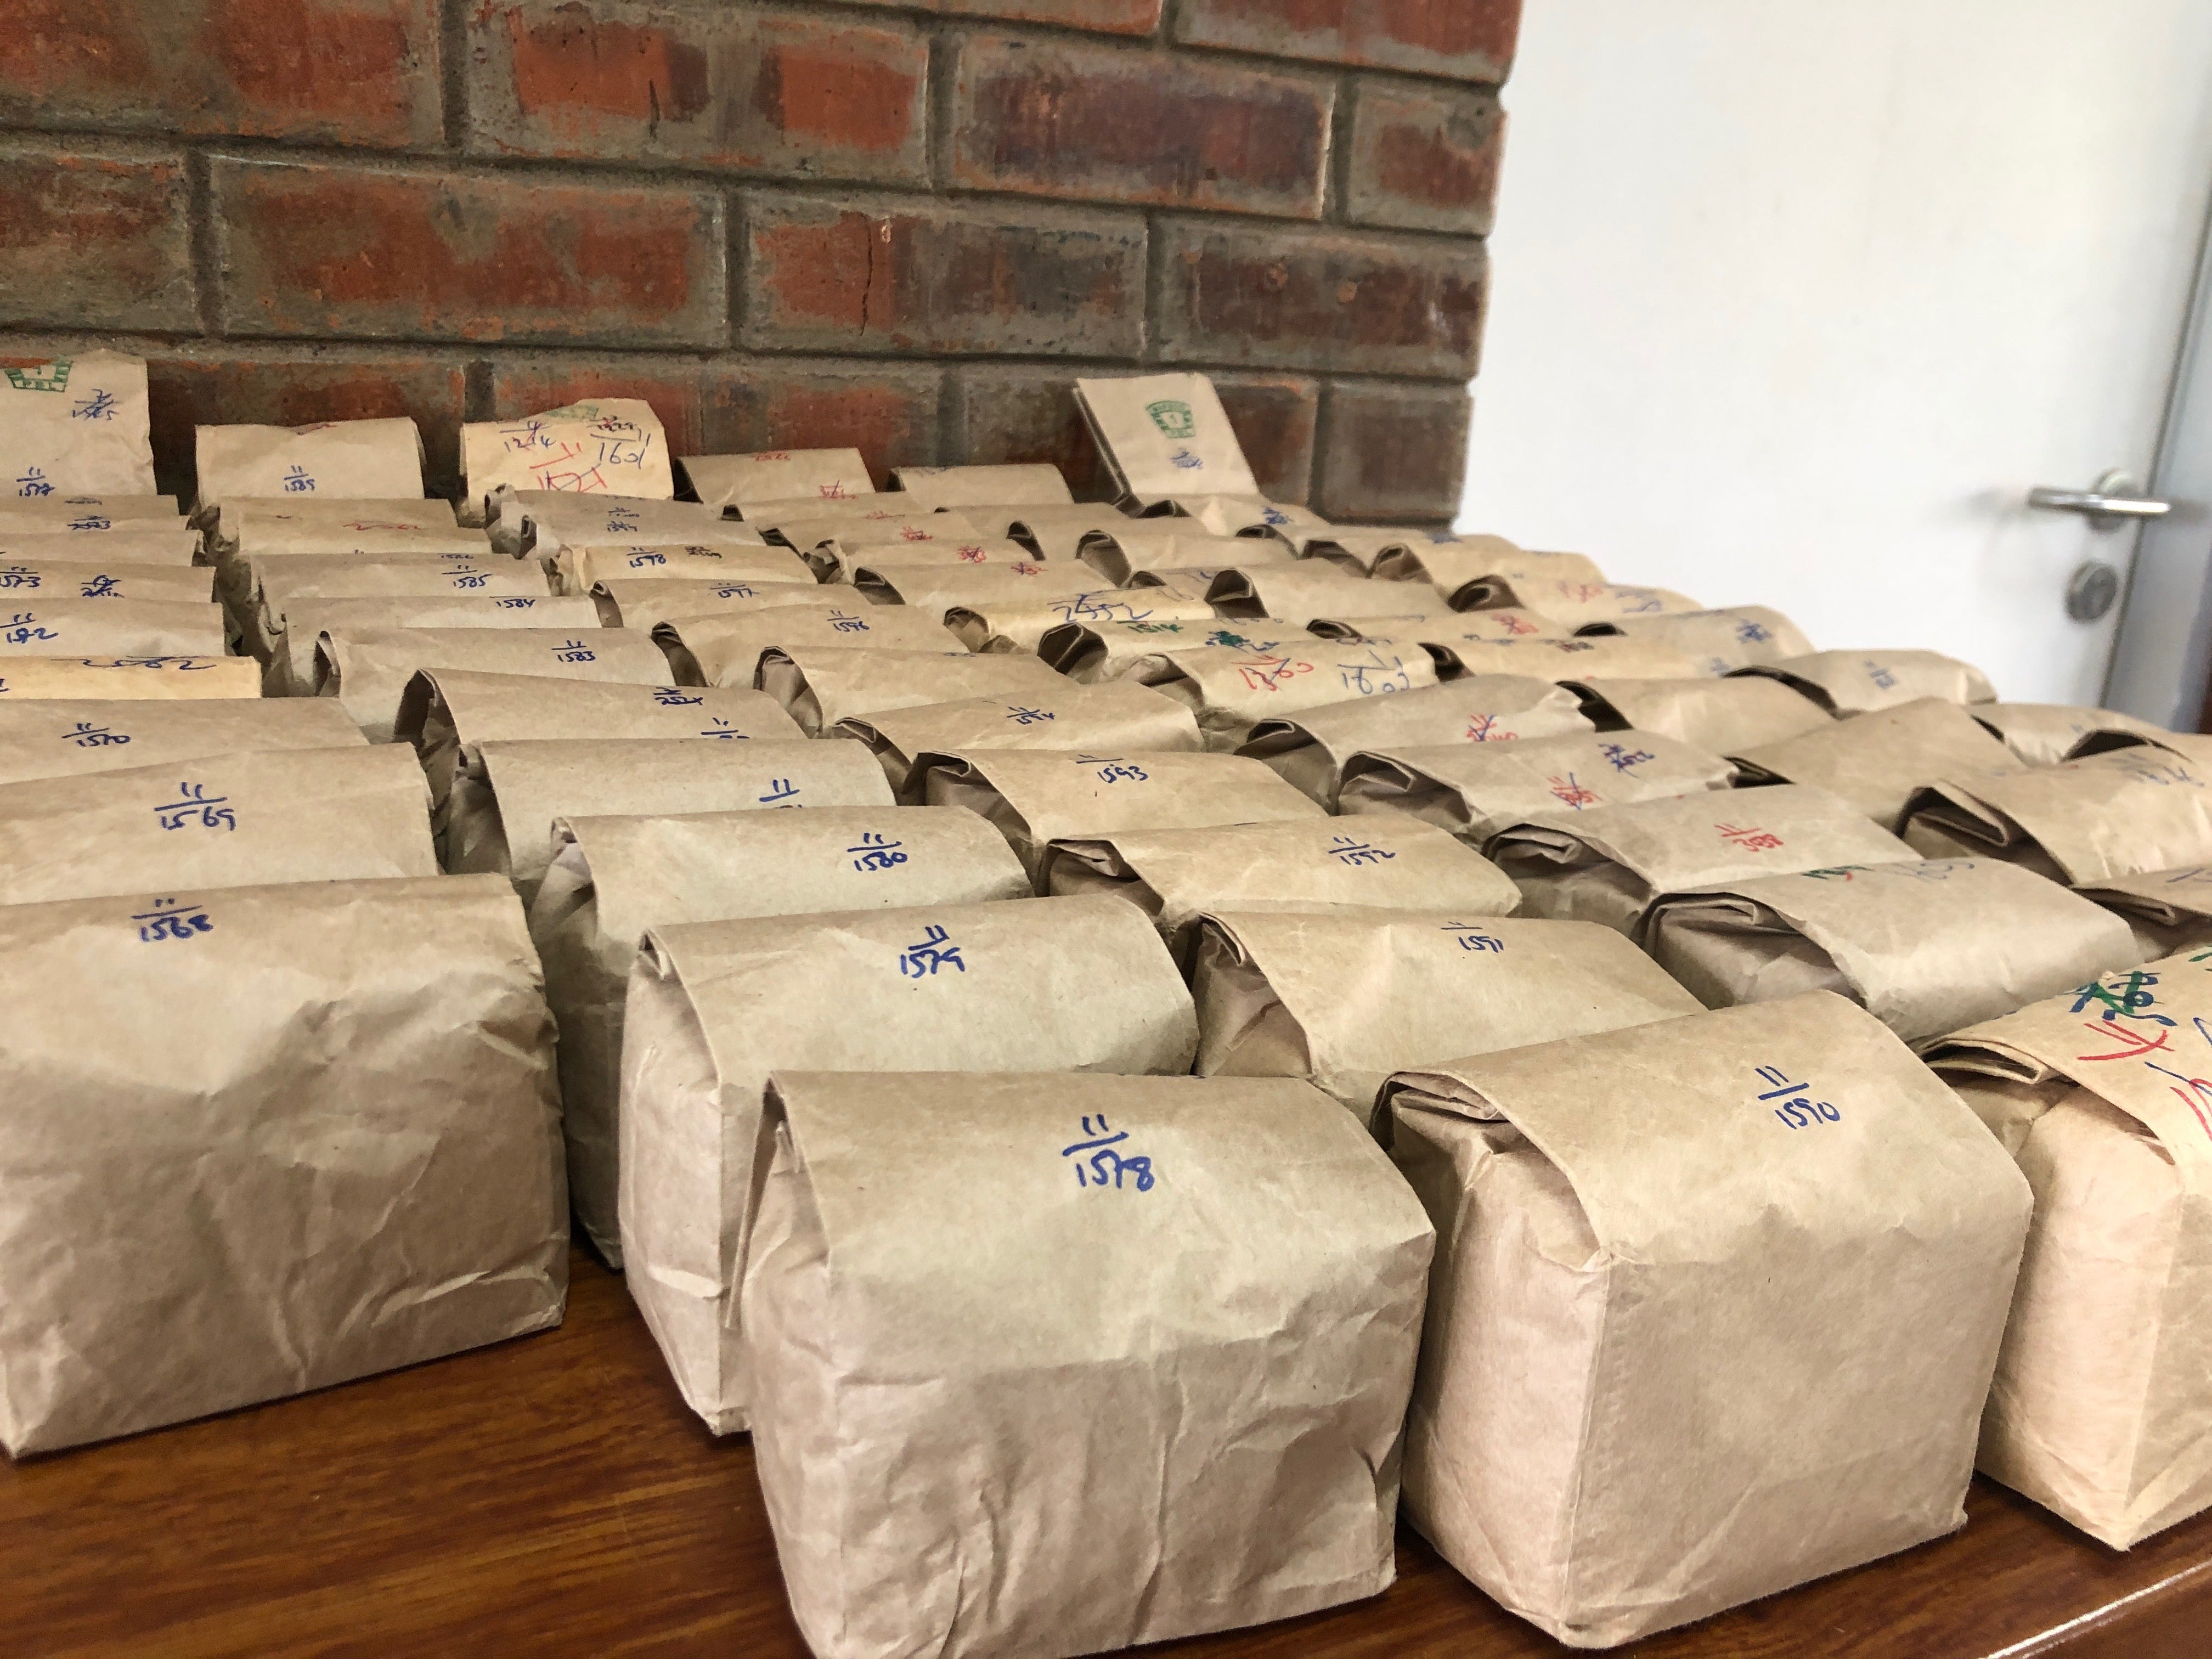 tabled with rows of paper bags of coffee to be tasted and chosen for purchase at Dormans in Kenya